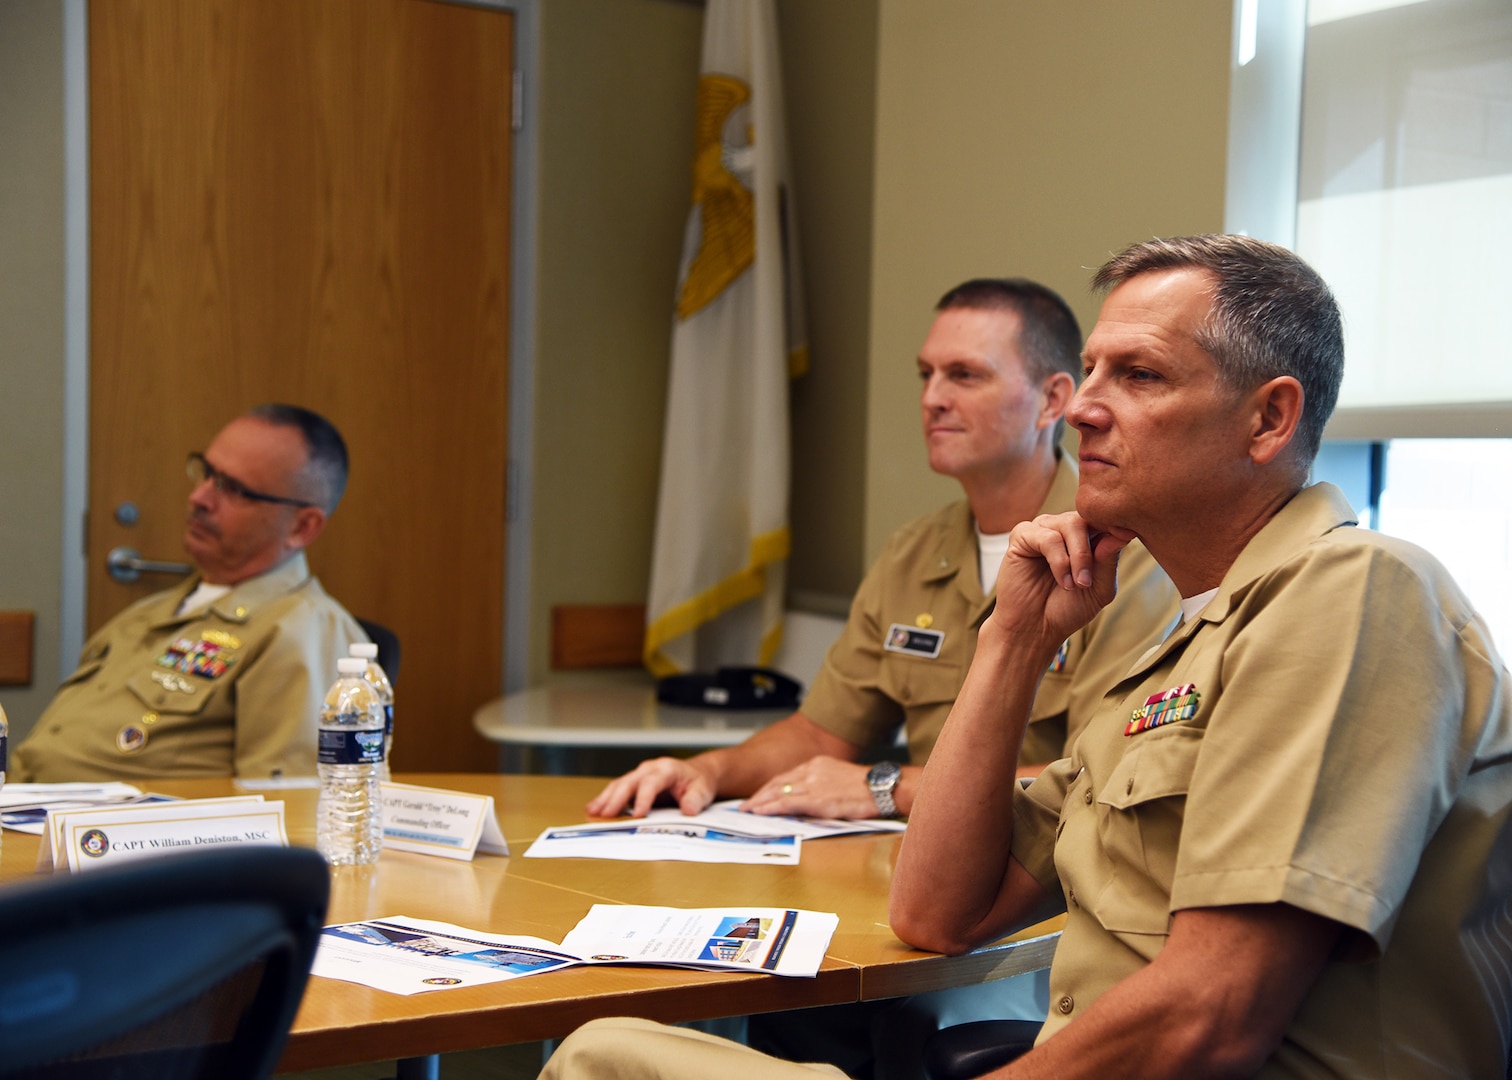 JOINT BASE SAN ANTONIO-FORT SAM HOUSTON – (Aug. 3, 2023) – Capt. William Deniston (right), commander, Naval Medical Research Command (NMRC), joined by Capt. Gerald DeLong, commanding officer, Naval Medical Research Unit (NAMRU) San Antonio, and Capt. Robert Hawkins (left), director, J3/5/7, Defense Health Agency (DHA) and director, U.S. Navy Nurse Corps, attended a command briefing on NAMRU San Antonio’s core capabilities at the Battlefield Health and Trauma Research Institute.  NAMRU San Antonio’s mission is to conduct gap driven combat casualty care, craniofacial, and directed energy research to improve survival, operational readiness, and safety of Department of Defense (DoD) personnel engaged in routine and expeditionary operations. It is one of the leading research and development laboratories for the U.S. Navy under the DoD and is one of eight subordinate research commands in the global network of laboratories operating under NMRC in Silver Spring, Md. (U.S. Navy photo by Burrell Parmer, NAMRU San Antonio Public Affairs/Released)